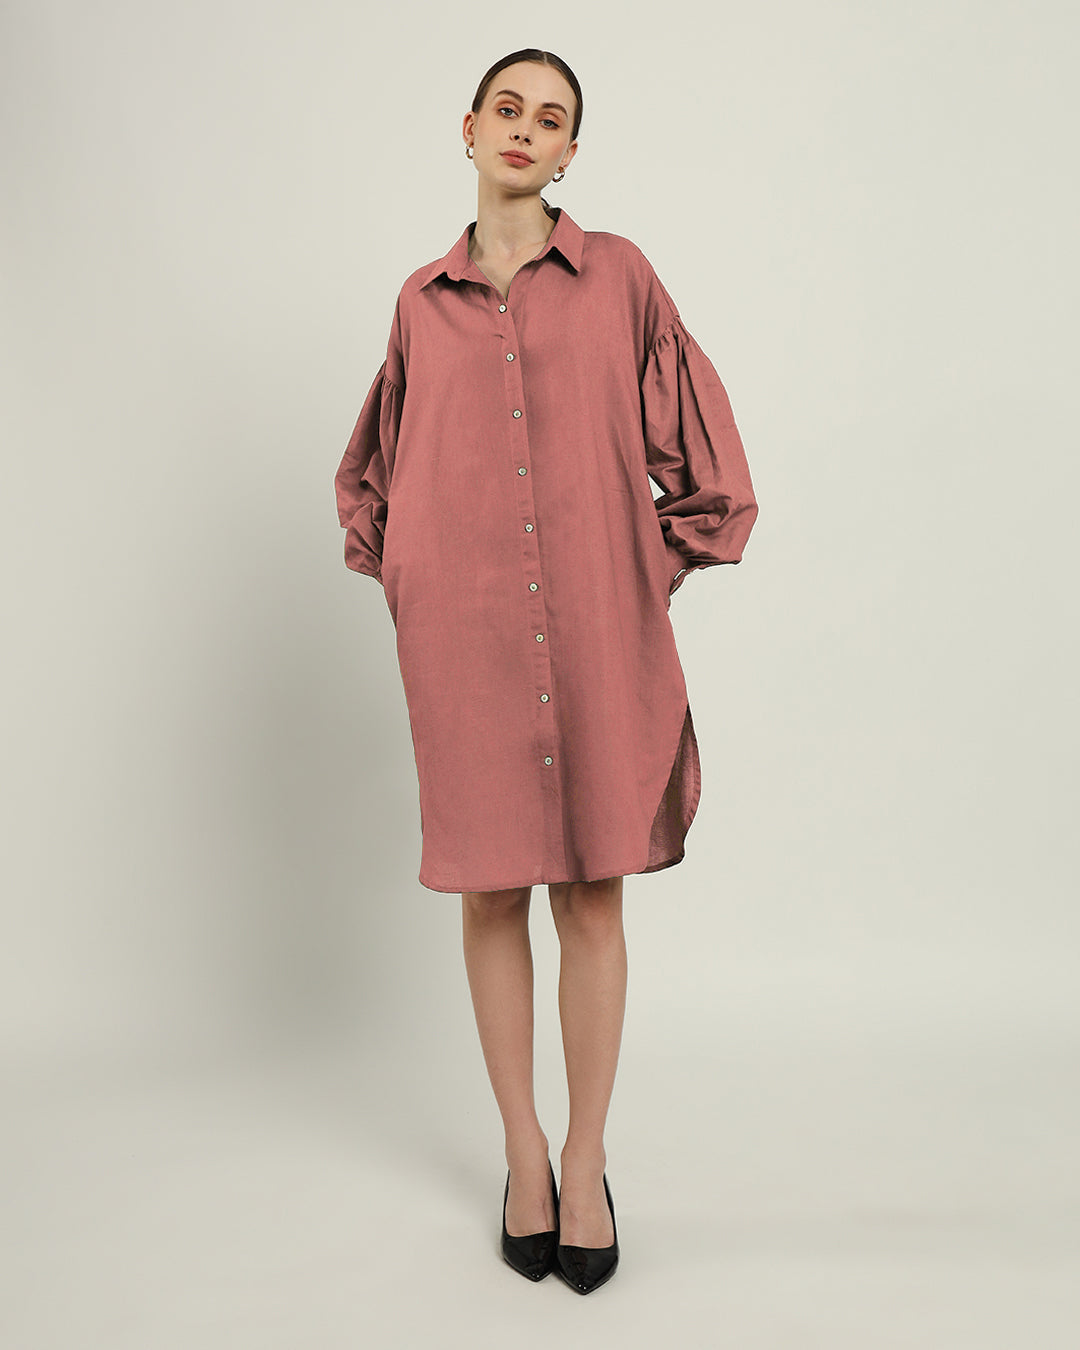 The Derby Ivory Pink Cotton Dress